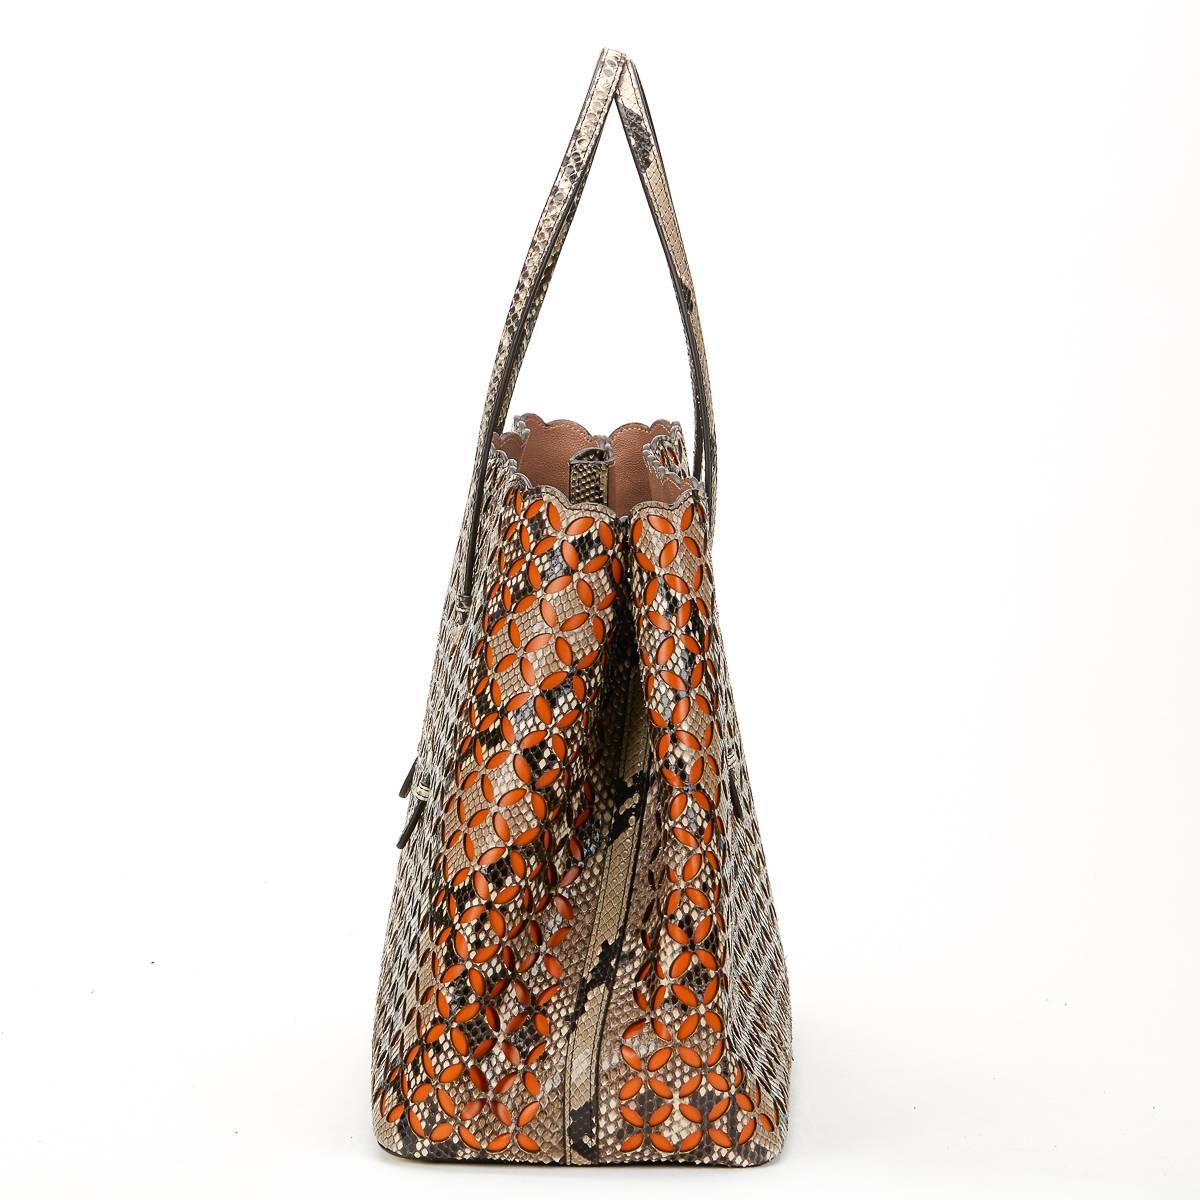 ALAIA
Python Leather & Orange Calfskin Leather Perforated Shopper

Reference: HB576
Age (Circa): 2001
Accompanied By: Mirror, Interior Pouch
Authenticity Details: (Made in Italy)
Gender: Ladies
Type: Shoulder, Tote, Shopper

Colour: